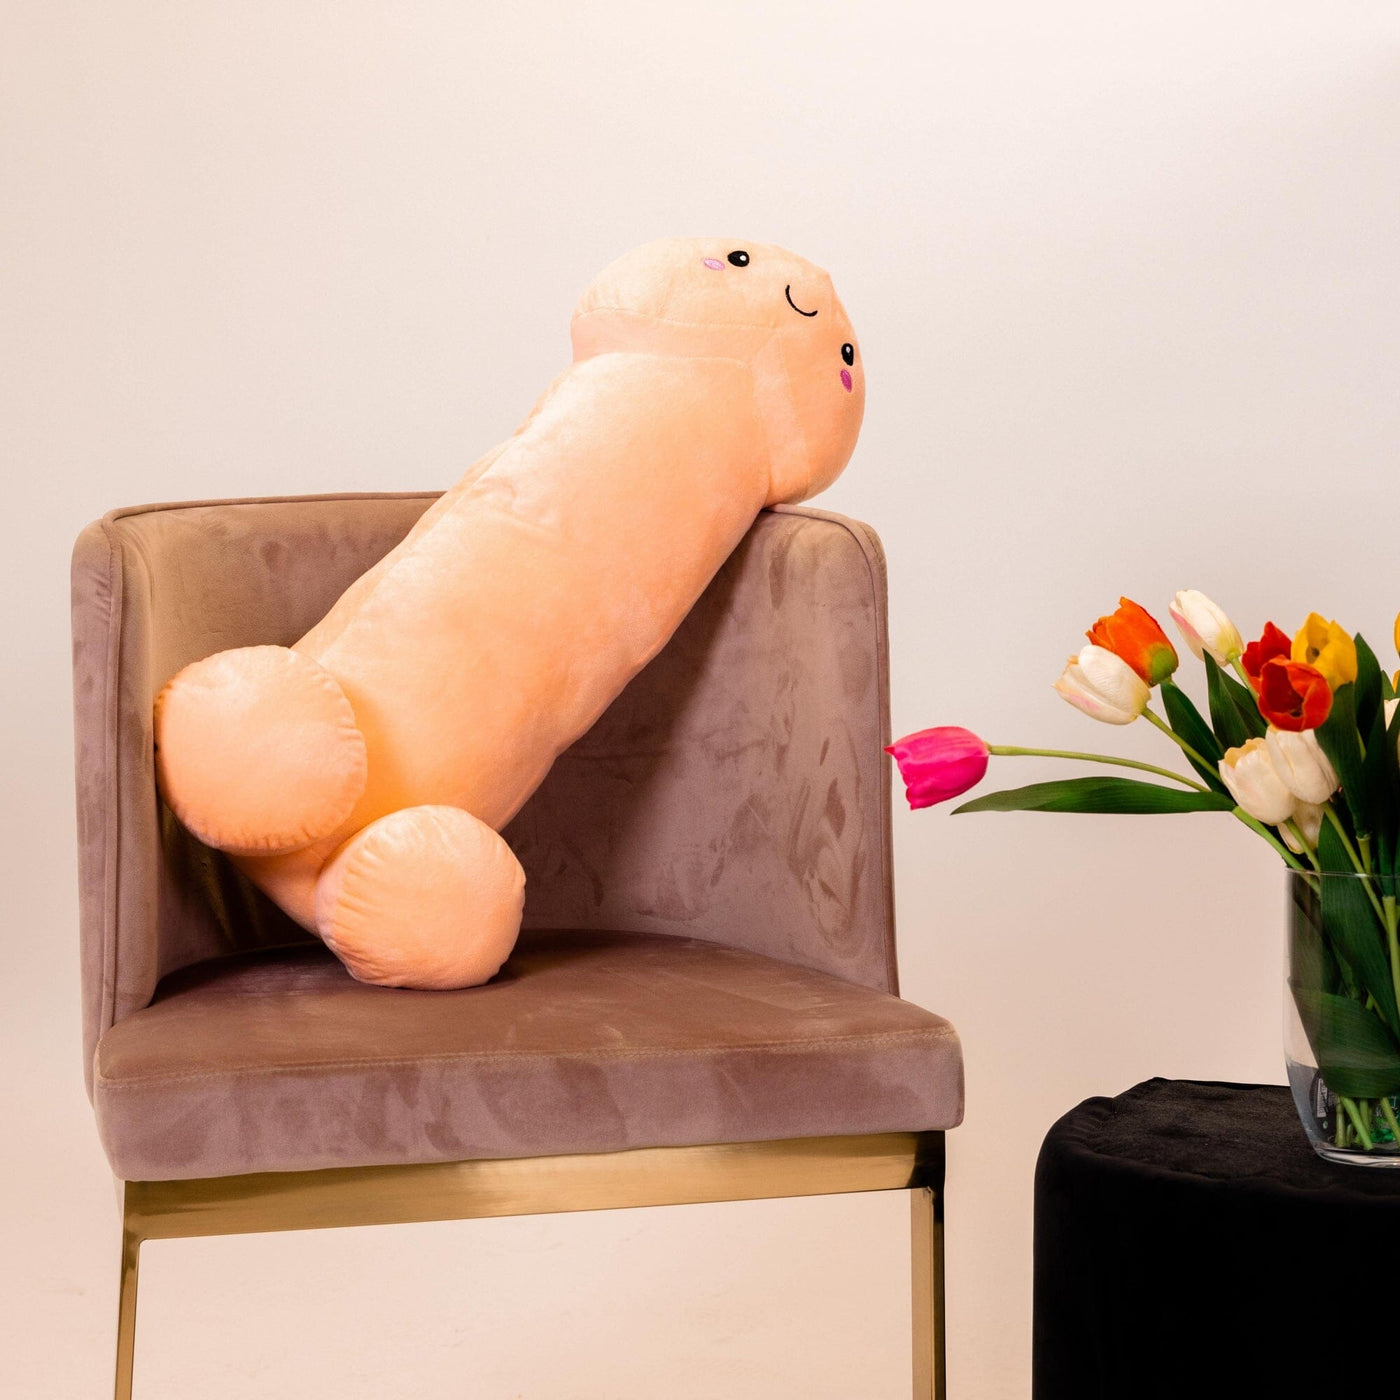 Penis Plushie - "Don't Be a Dick"! 12 Inches or 24 Inches - Hamilton Park Electronics